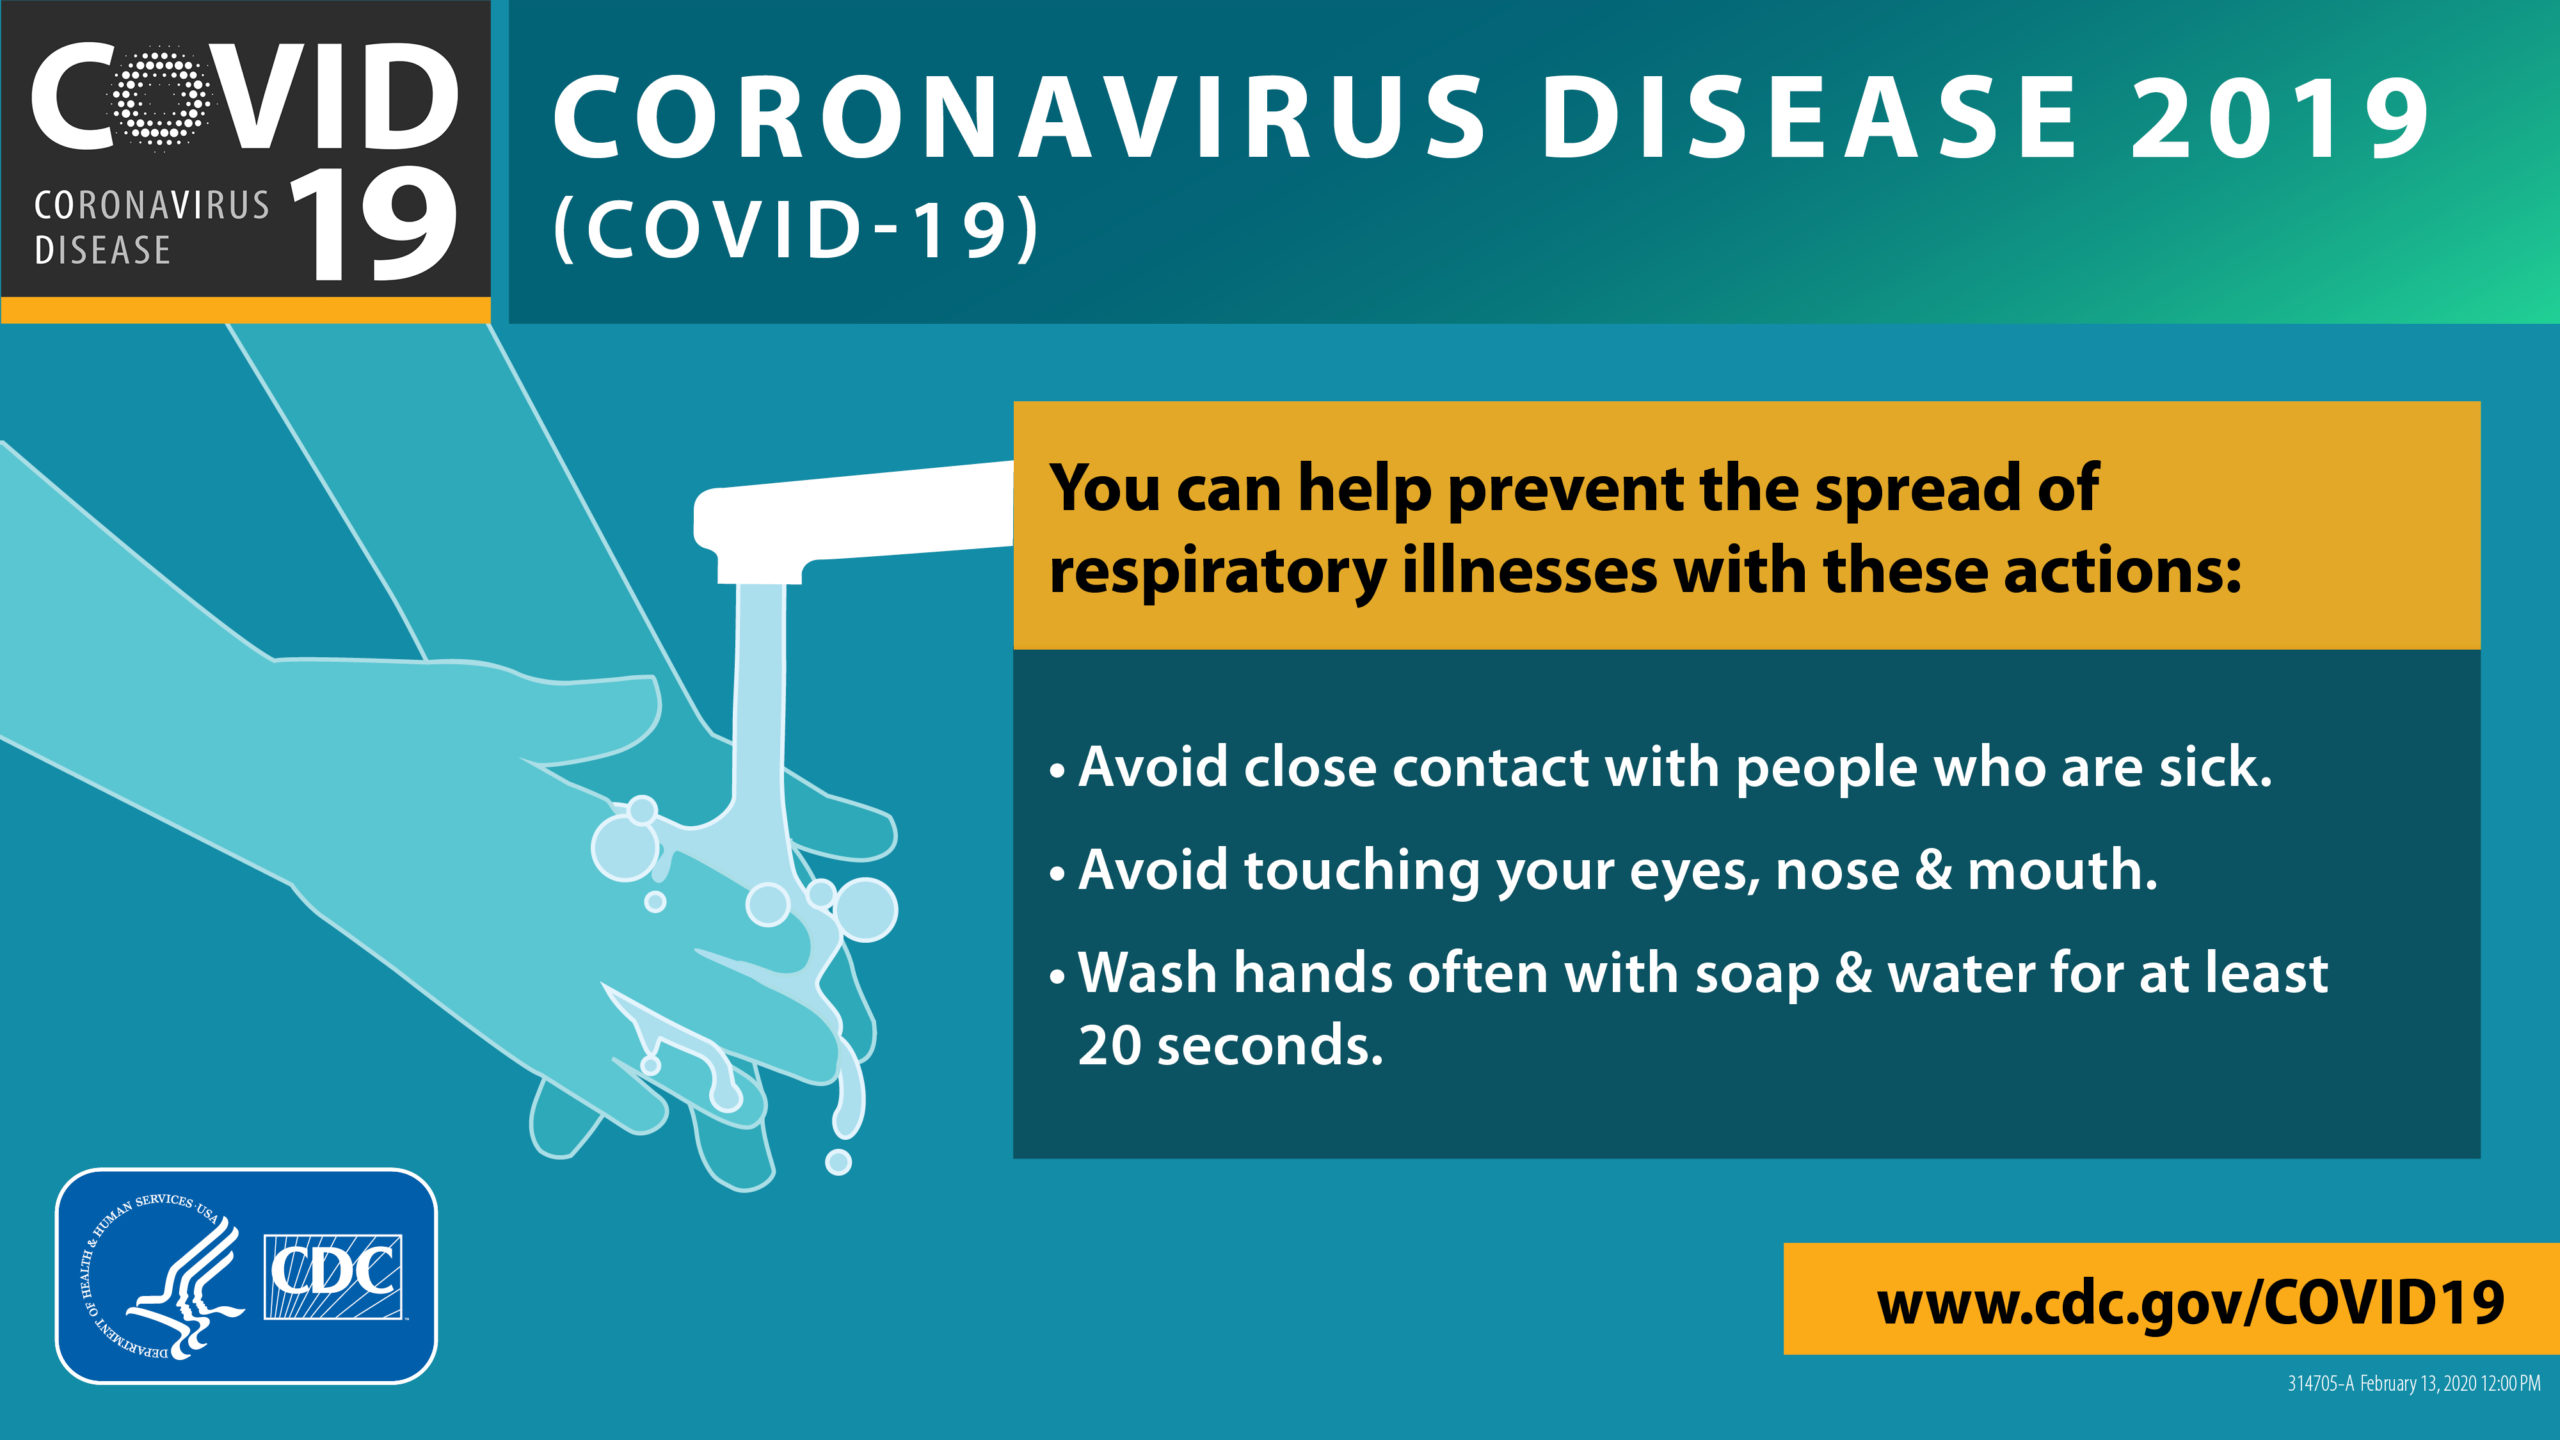 Coronavirus disease prevention tips from the CDC, including avoid contact with people who are sick, avoid touching your eyes, nose and mouth, and wash hands often.